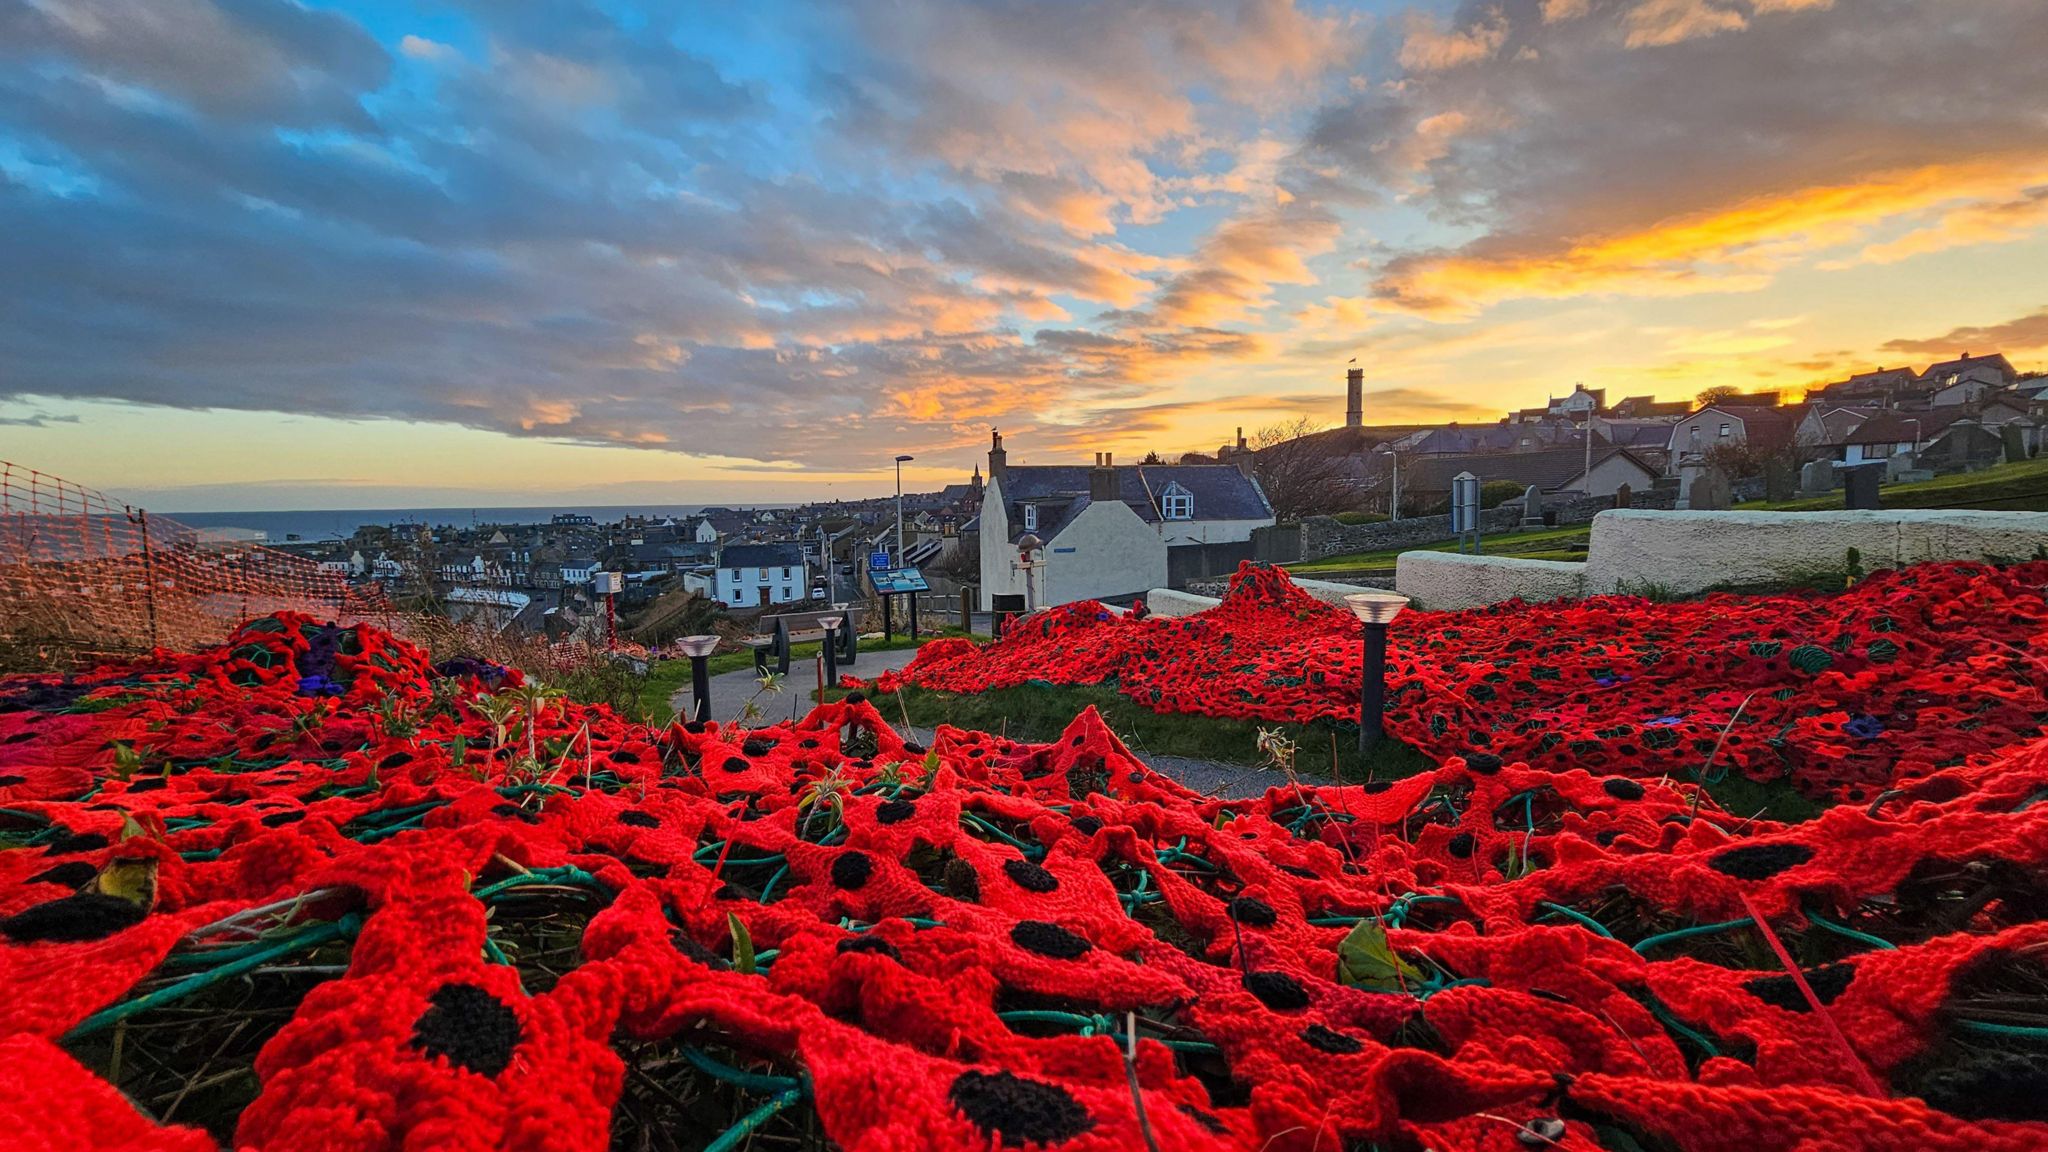 The poppy display during sunset